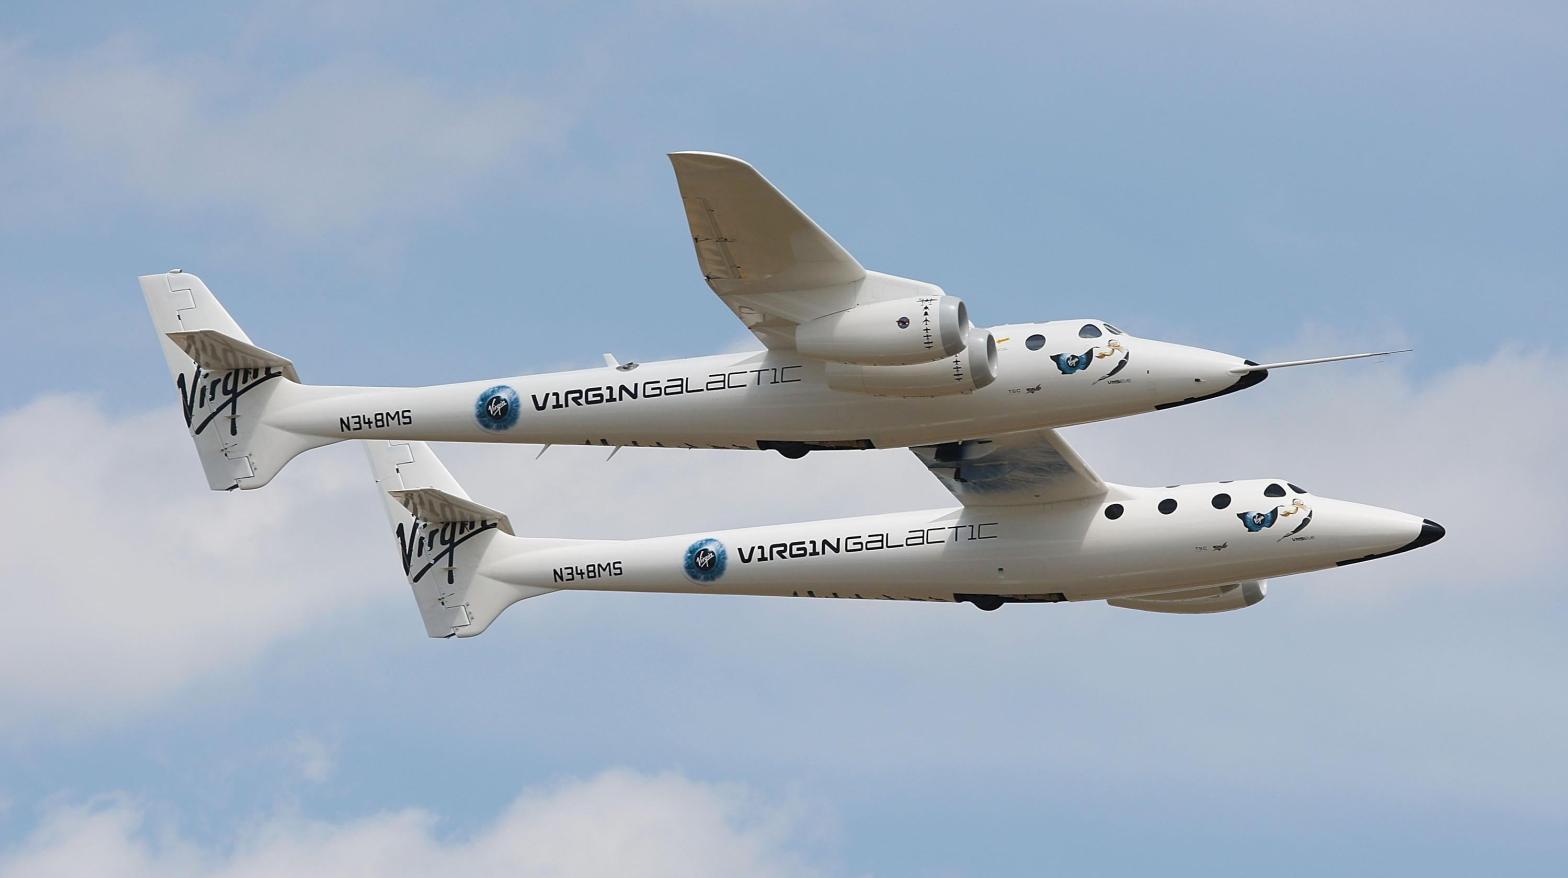 VMS Eve will carry one of the company's spaceplanes between its twin fuselages, and launch it during flight. (Image: Jonathan Daniel, Getty Images)